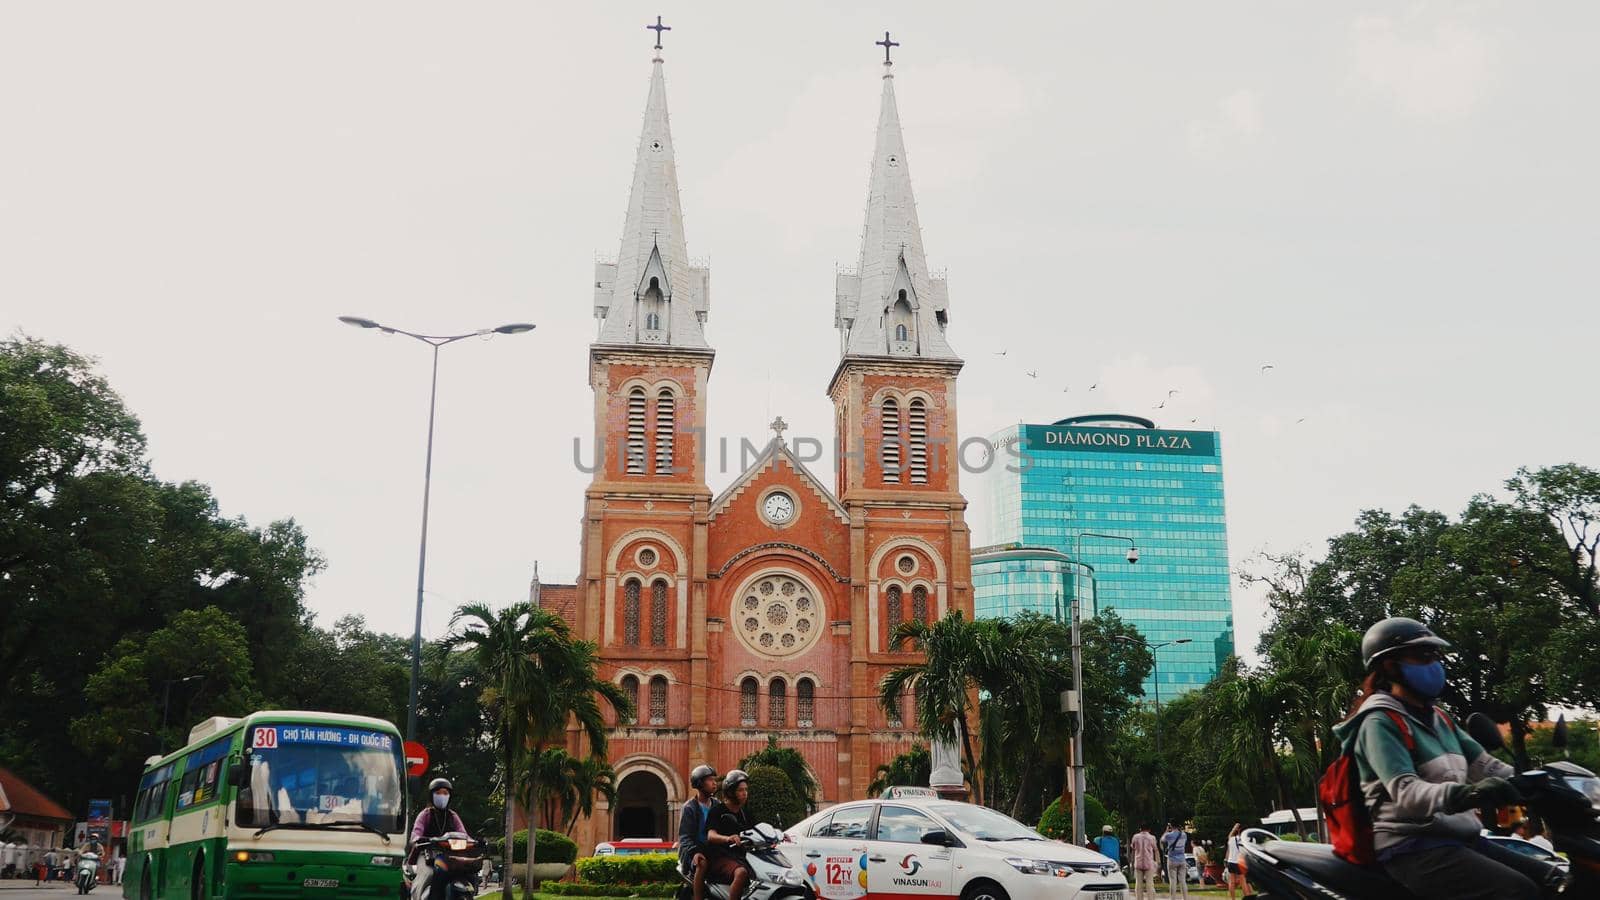 Saigon Notre-Dame Cathedral Basilica Basilica of Our Lady of The Immaculate Conception on blue sky background in Ho Chi Minh city, Vietnam. Ho Chi Minh is a popular tourist destination of Asia